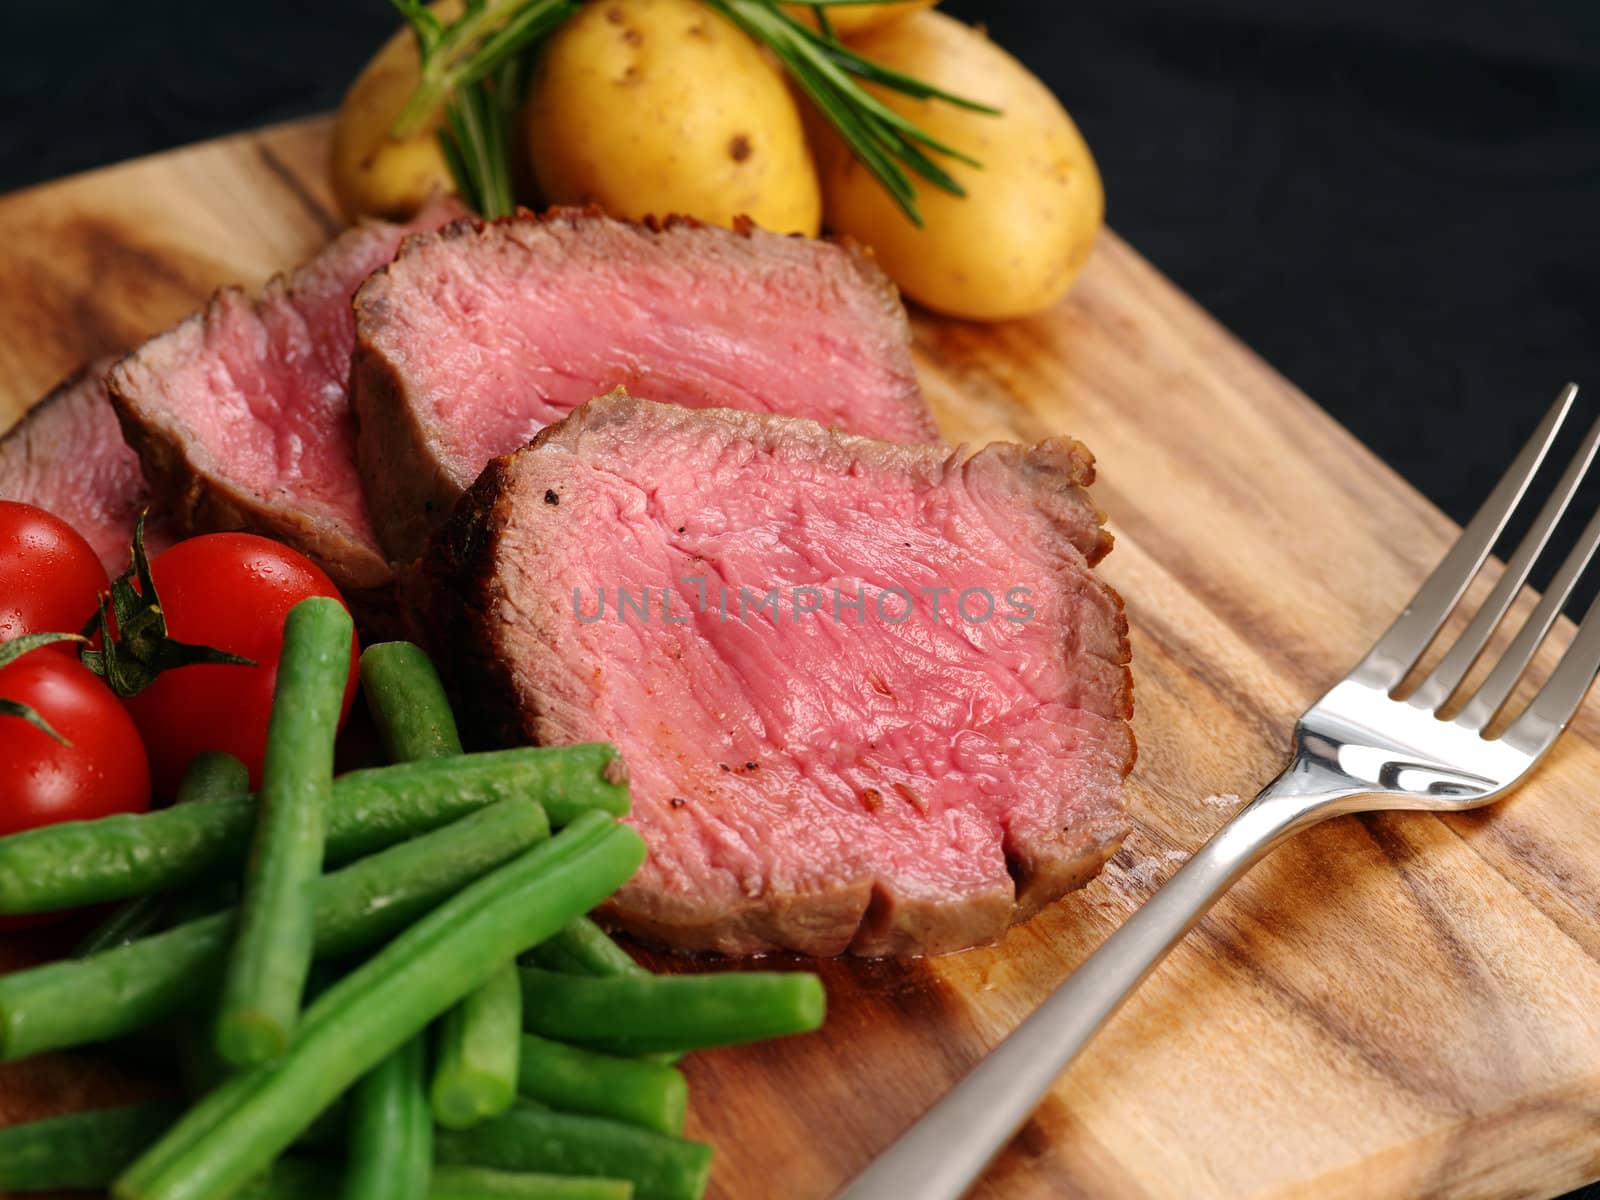 Photo of steak dinner with thick slices of sirloin, cherry tomatoes, green beans and potatoes on a wooden board.